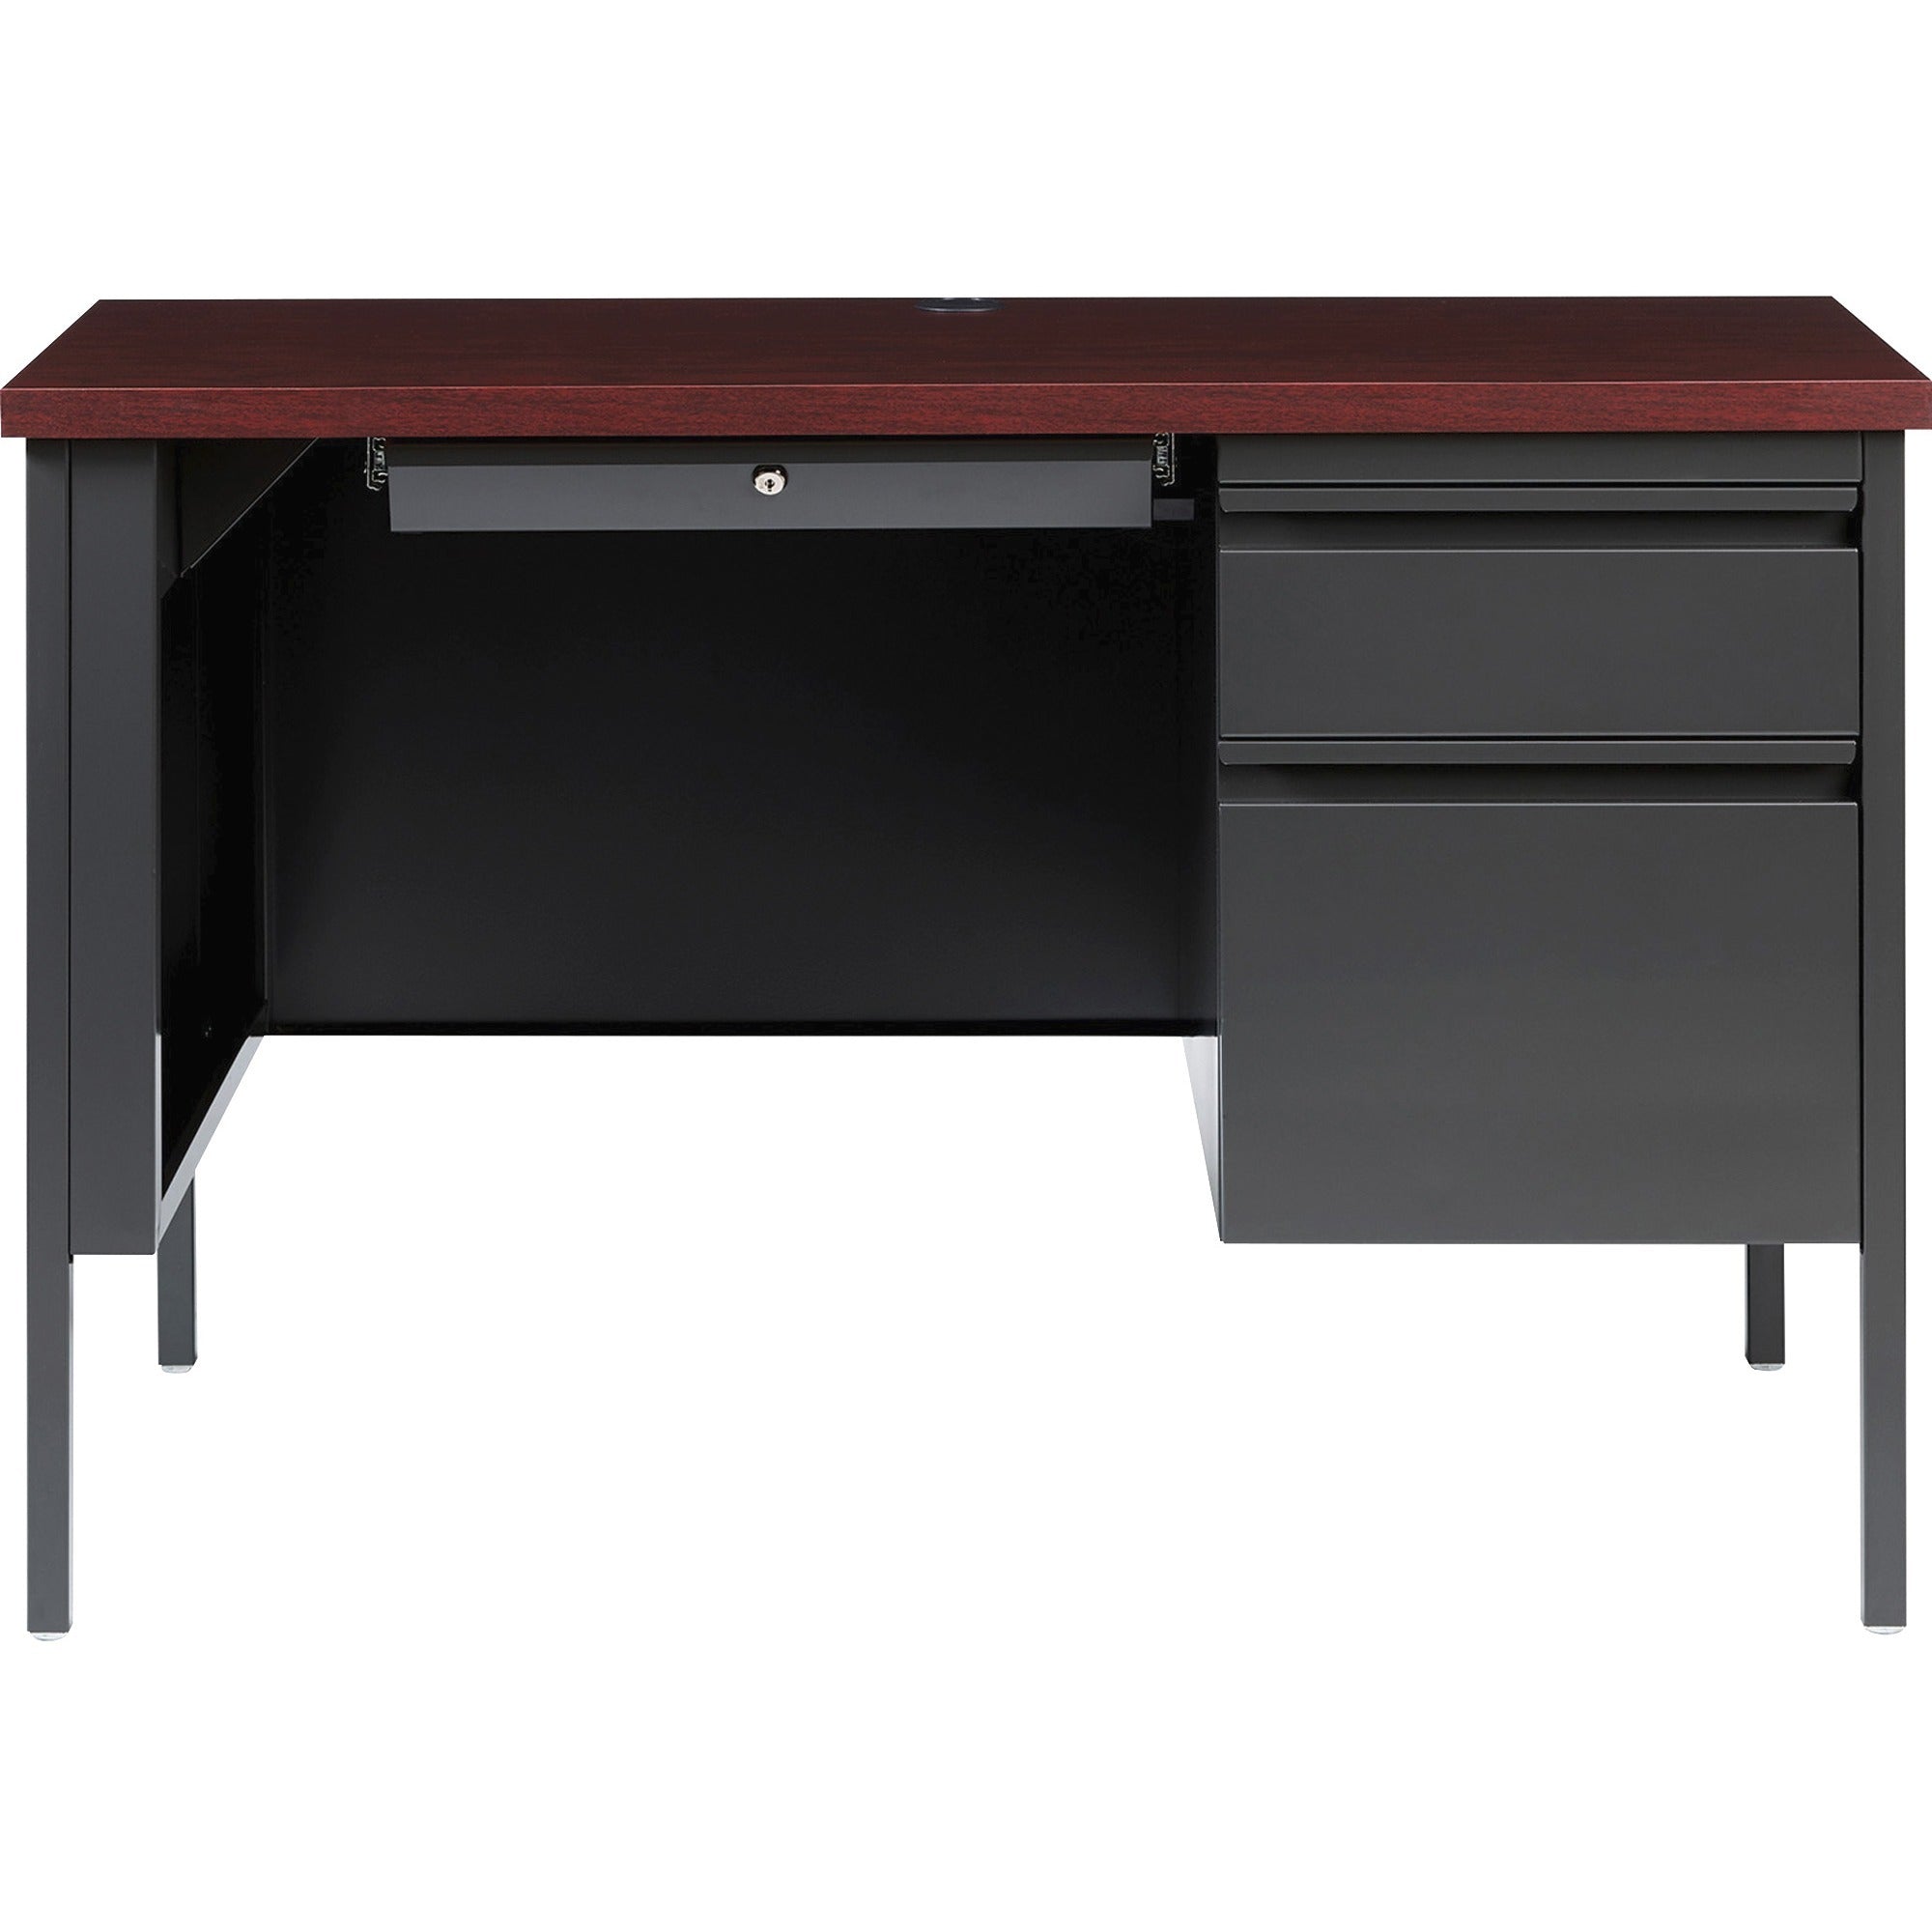 lorell-fortress-series-45-1-2-right-single-pedestal-desk-455-x-24295--11-top-box-file-drawers-single-pedestal-on-right-side-square-edge_llr66949 - 2